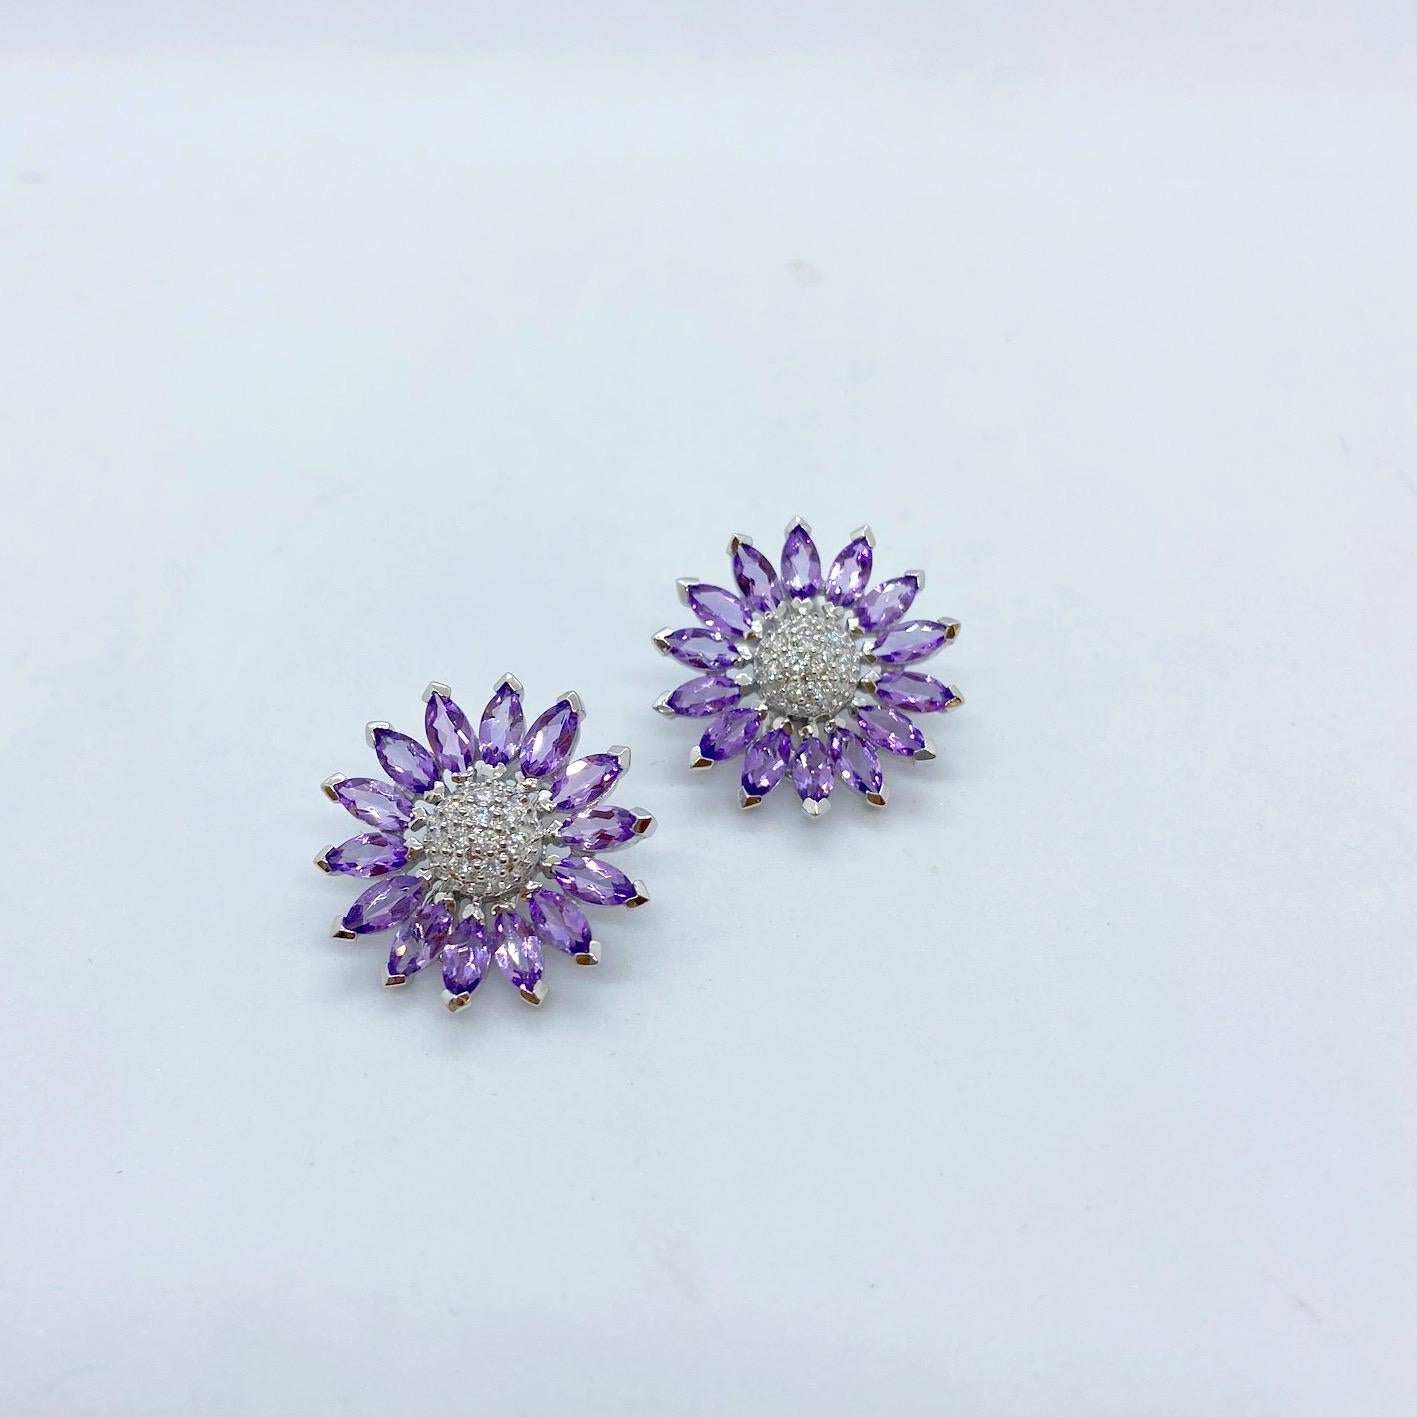 A pretty pair of ear clips.
These 18 karat white gold earrings are designed as sunflowers. Each earring has 14 marquis Amethyst stones as the petals , and 10 round brilliant Diamonds set in the center. The earrings have a post and Omega back and can